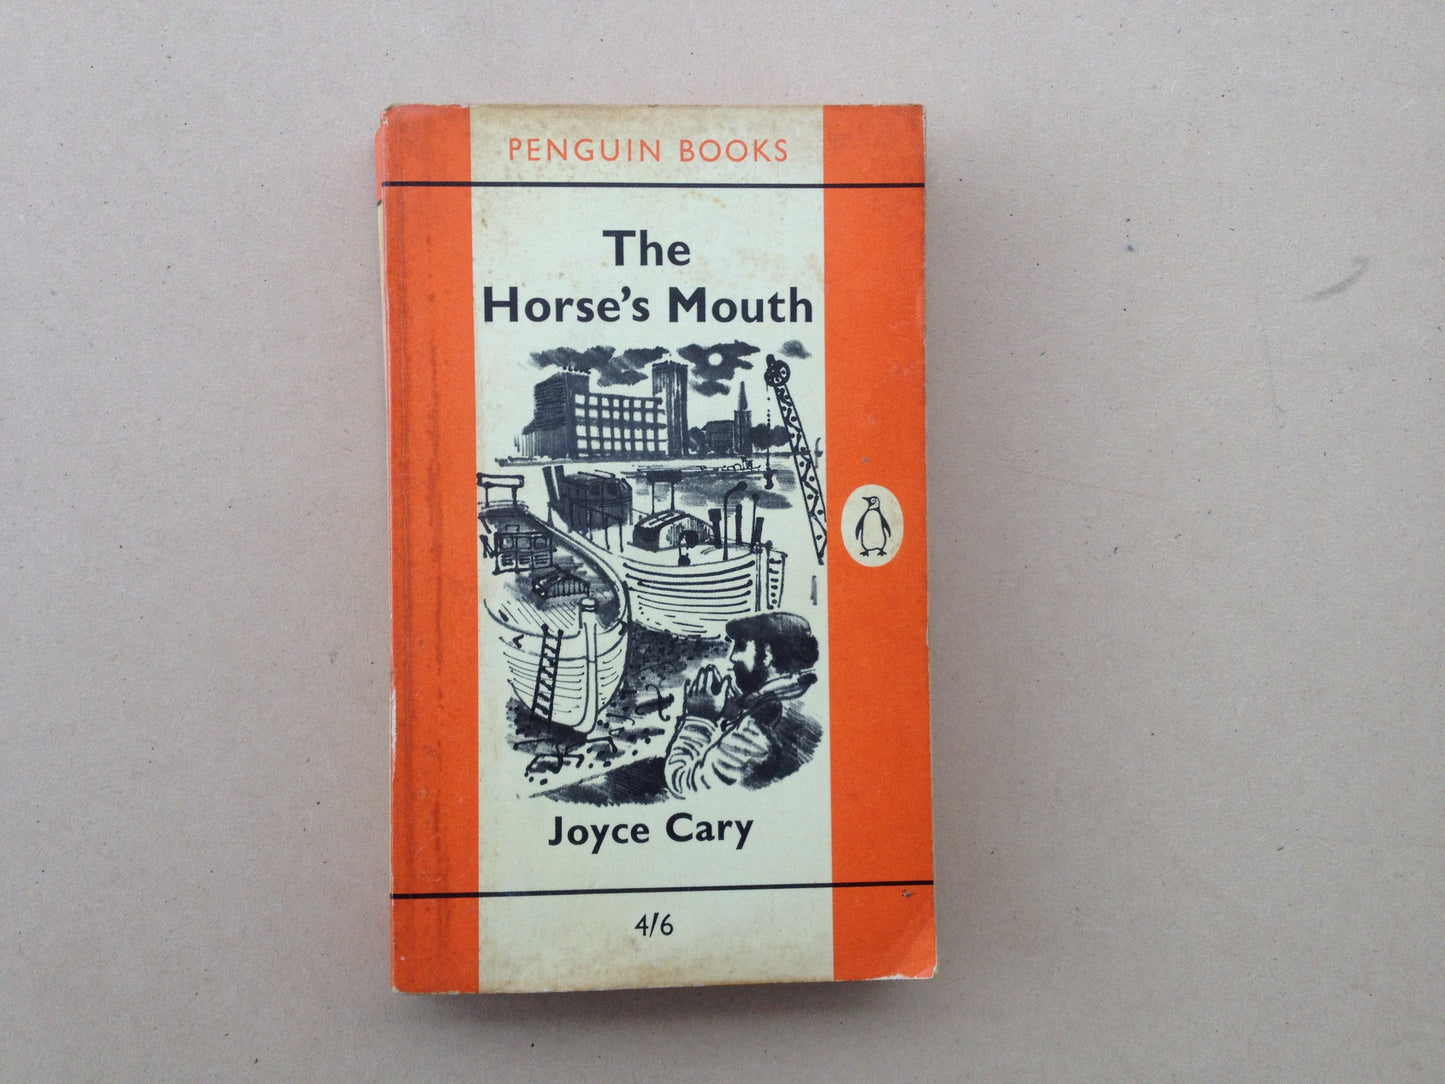 Penguin Series The Horse's Mouth by Joyce Cary - Softcover